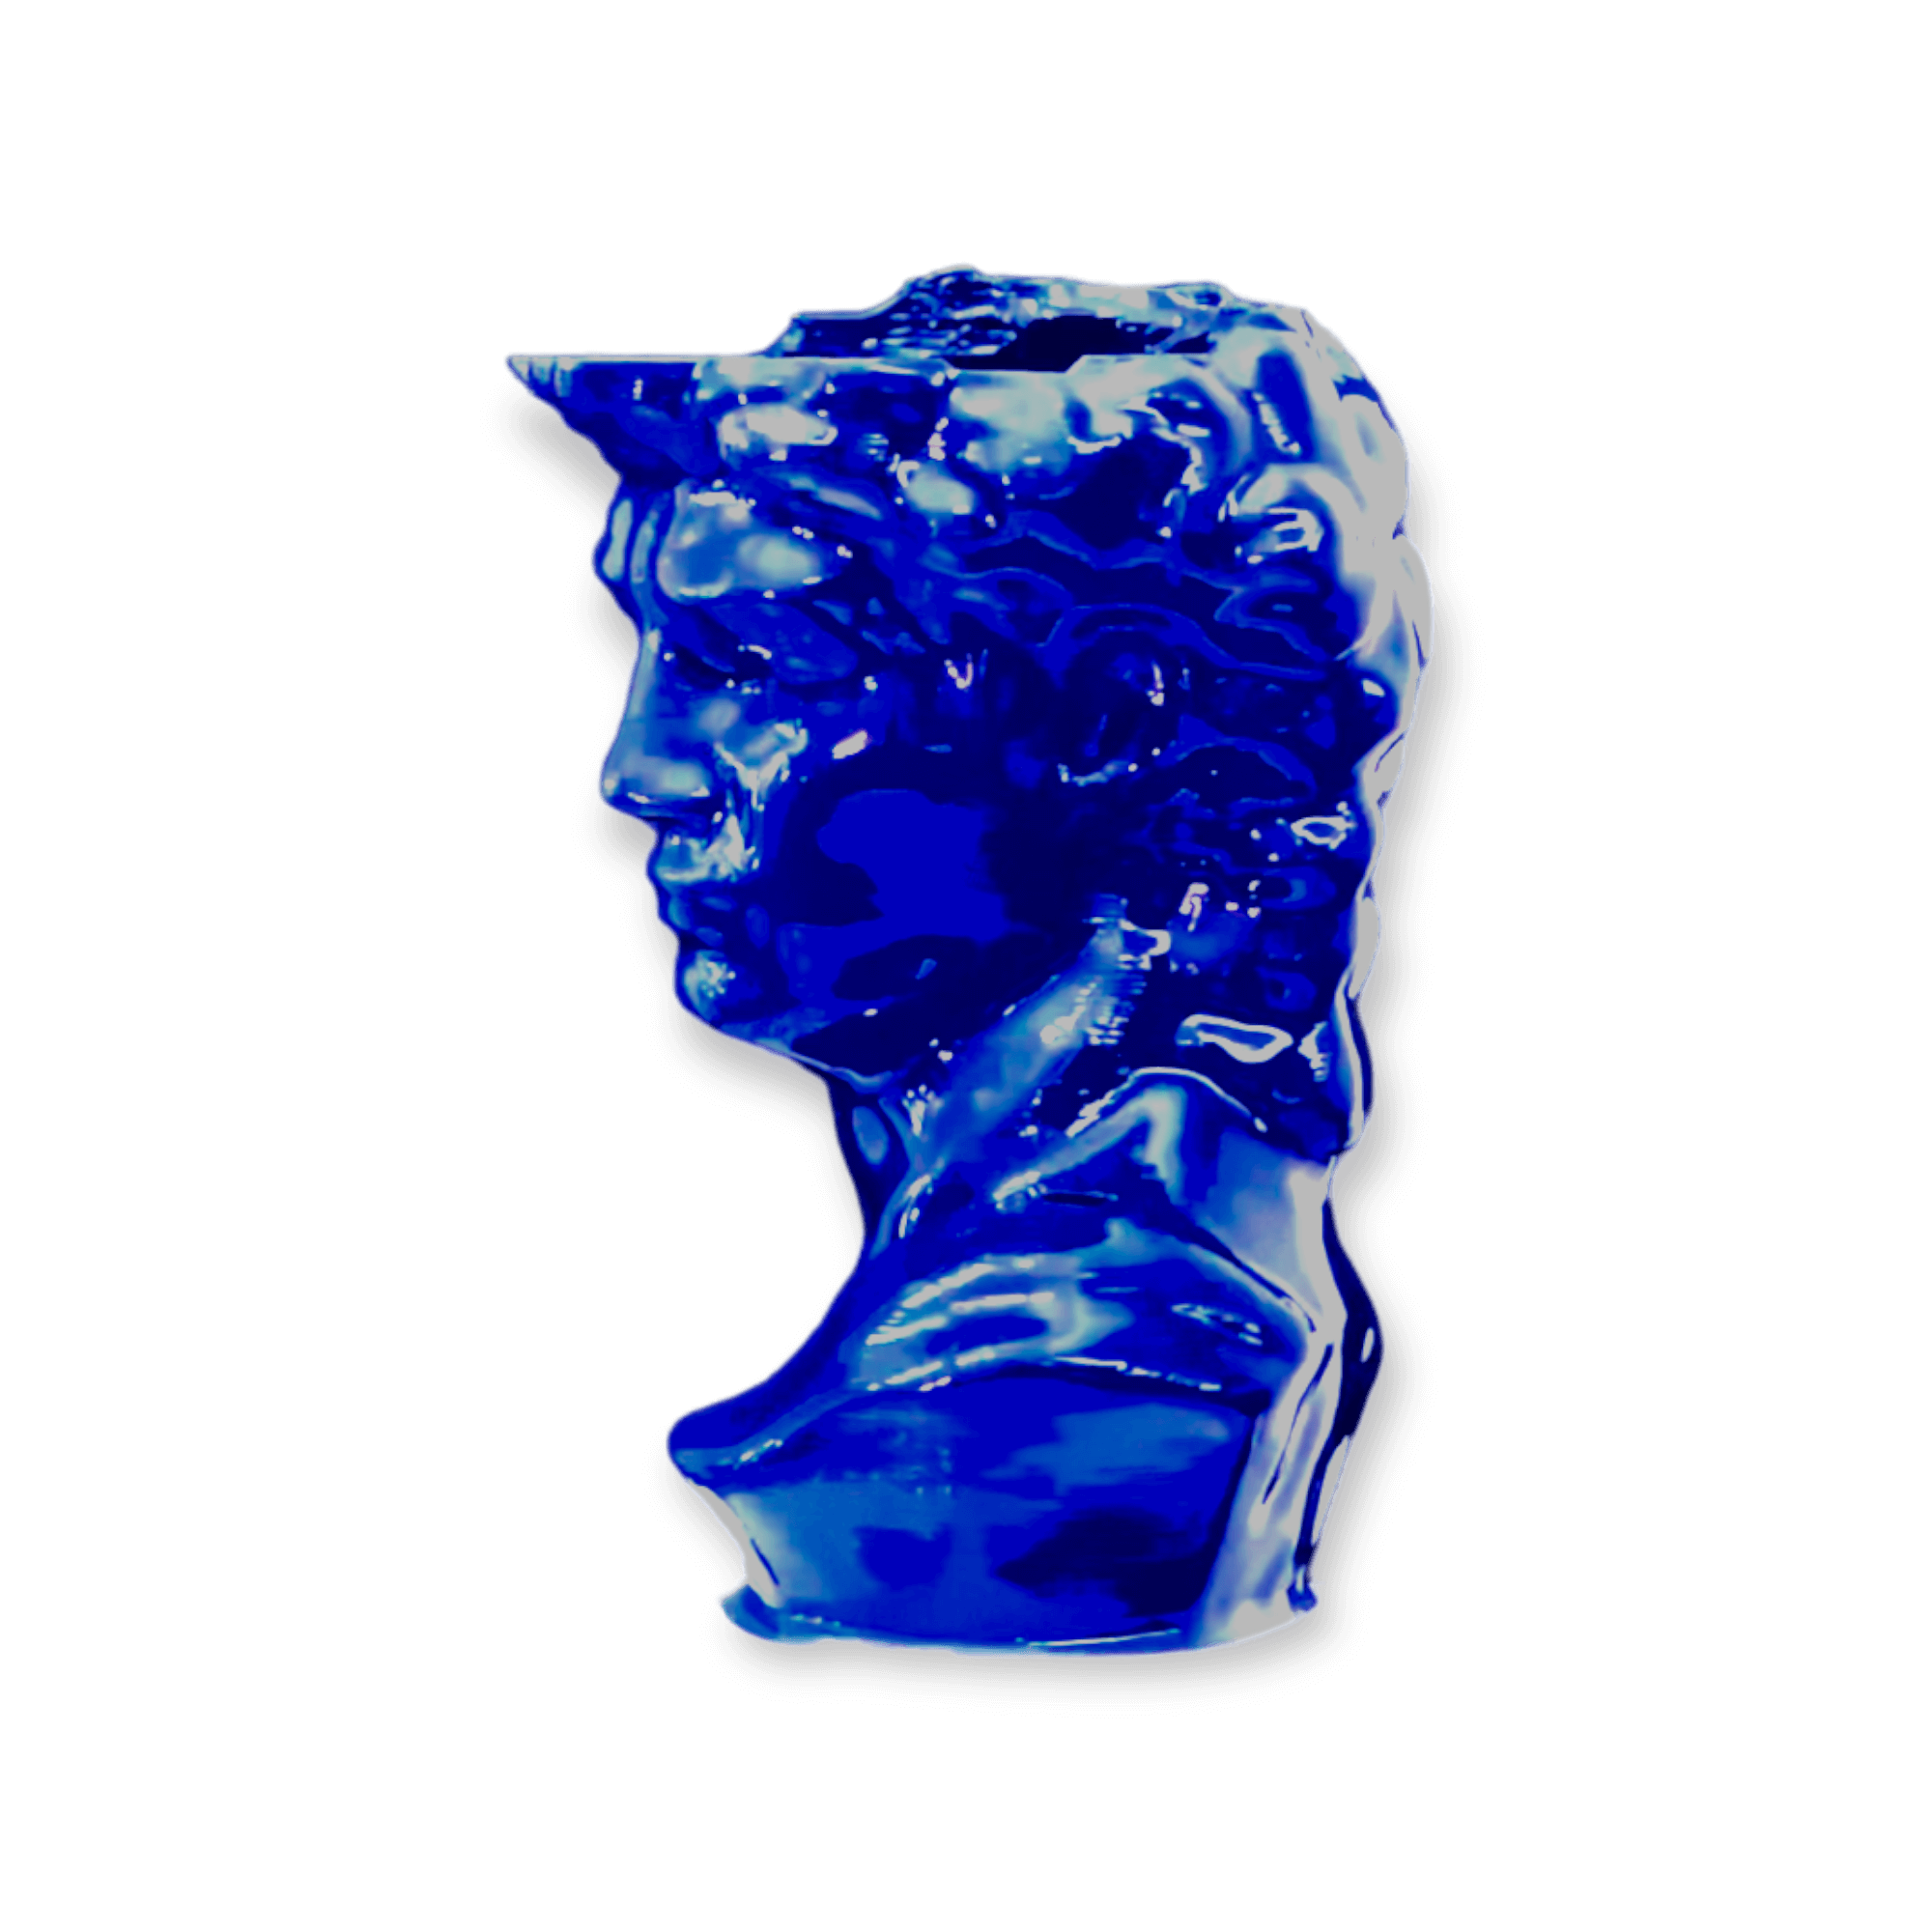 David mini 1 layer spiral and glazed 3d print 3.png.PNG